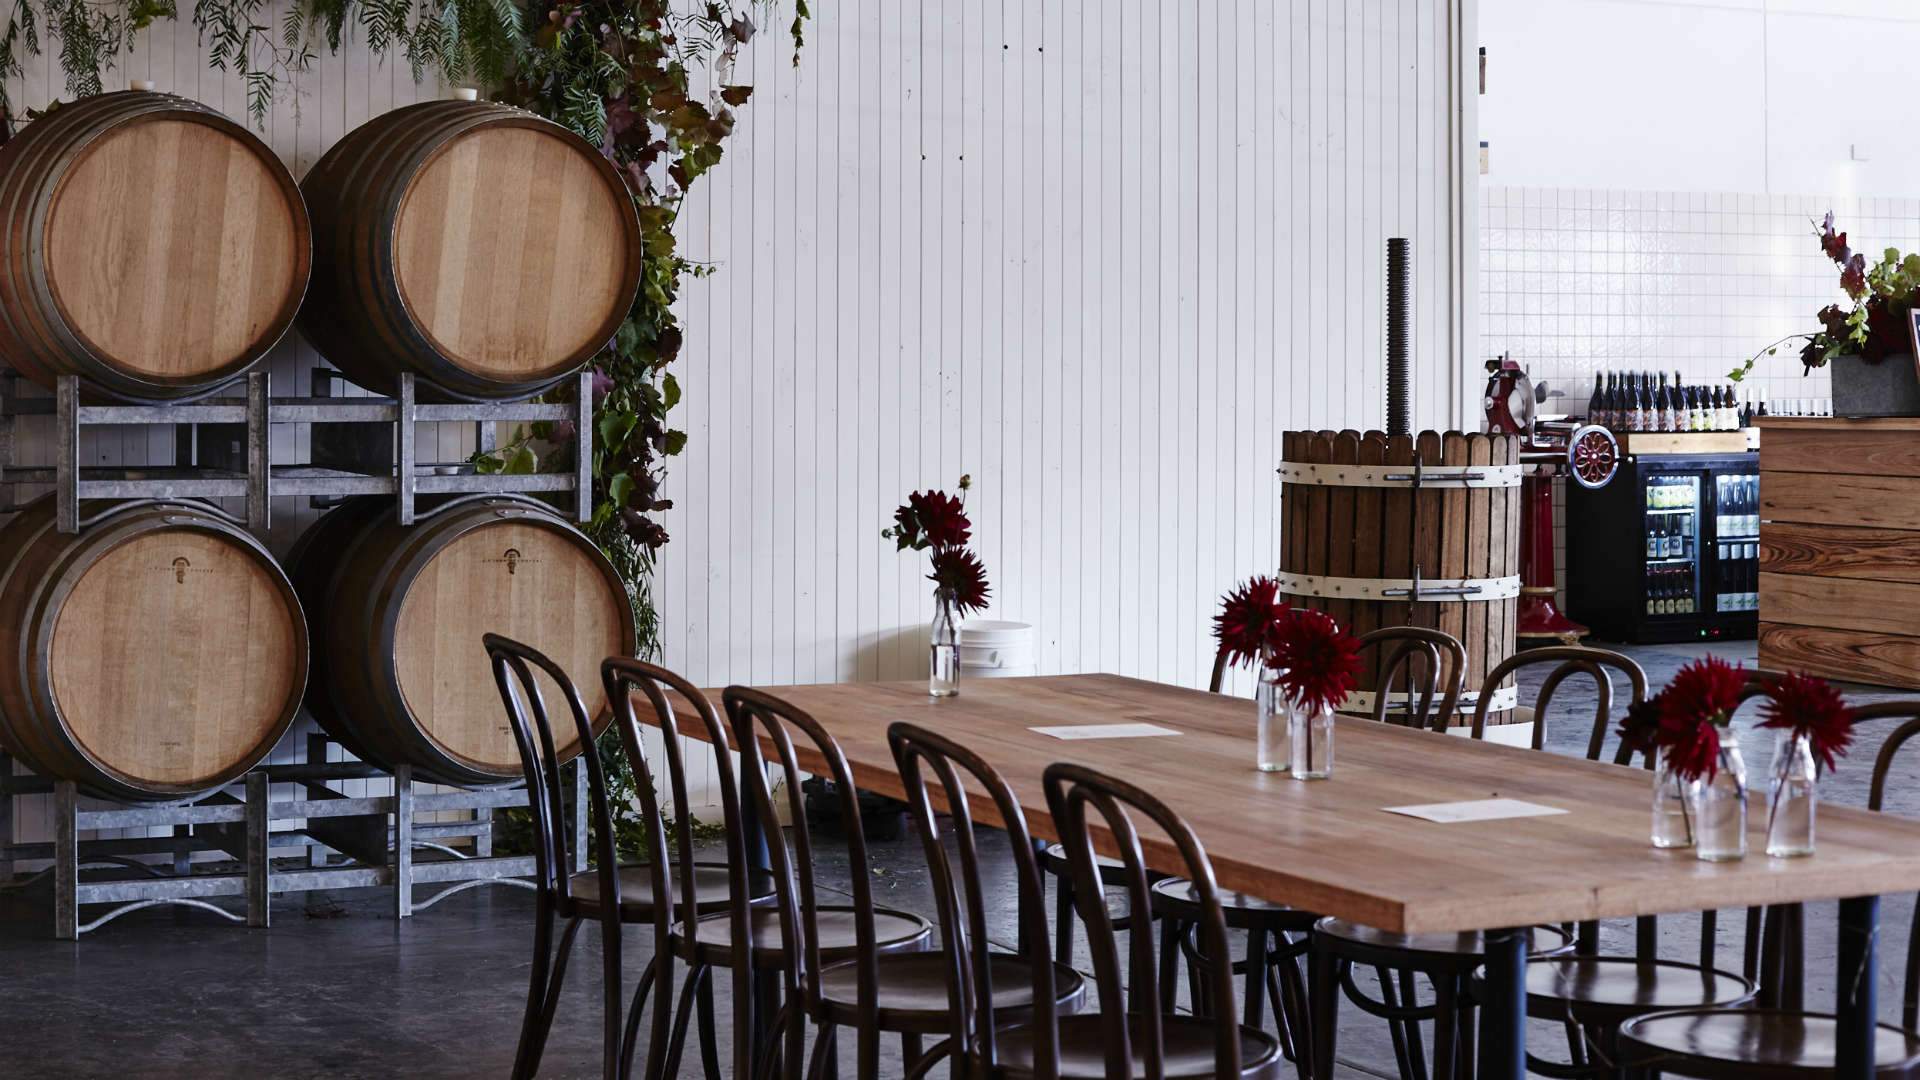 Urban Winery Project Teams Up With Three Blue Ducks for Sydney Pop-Up